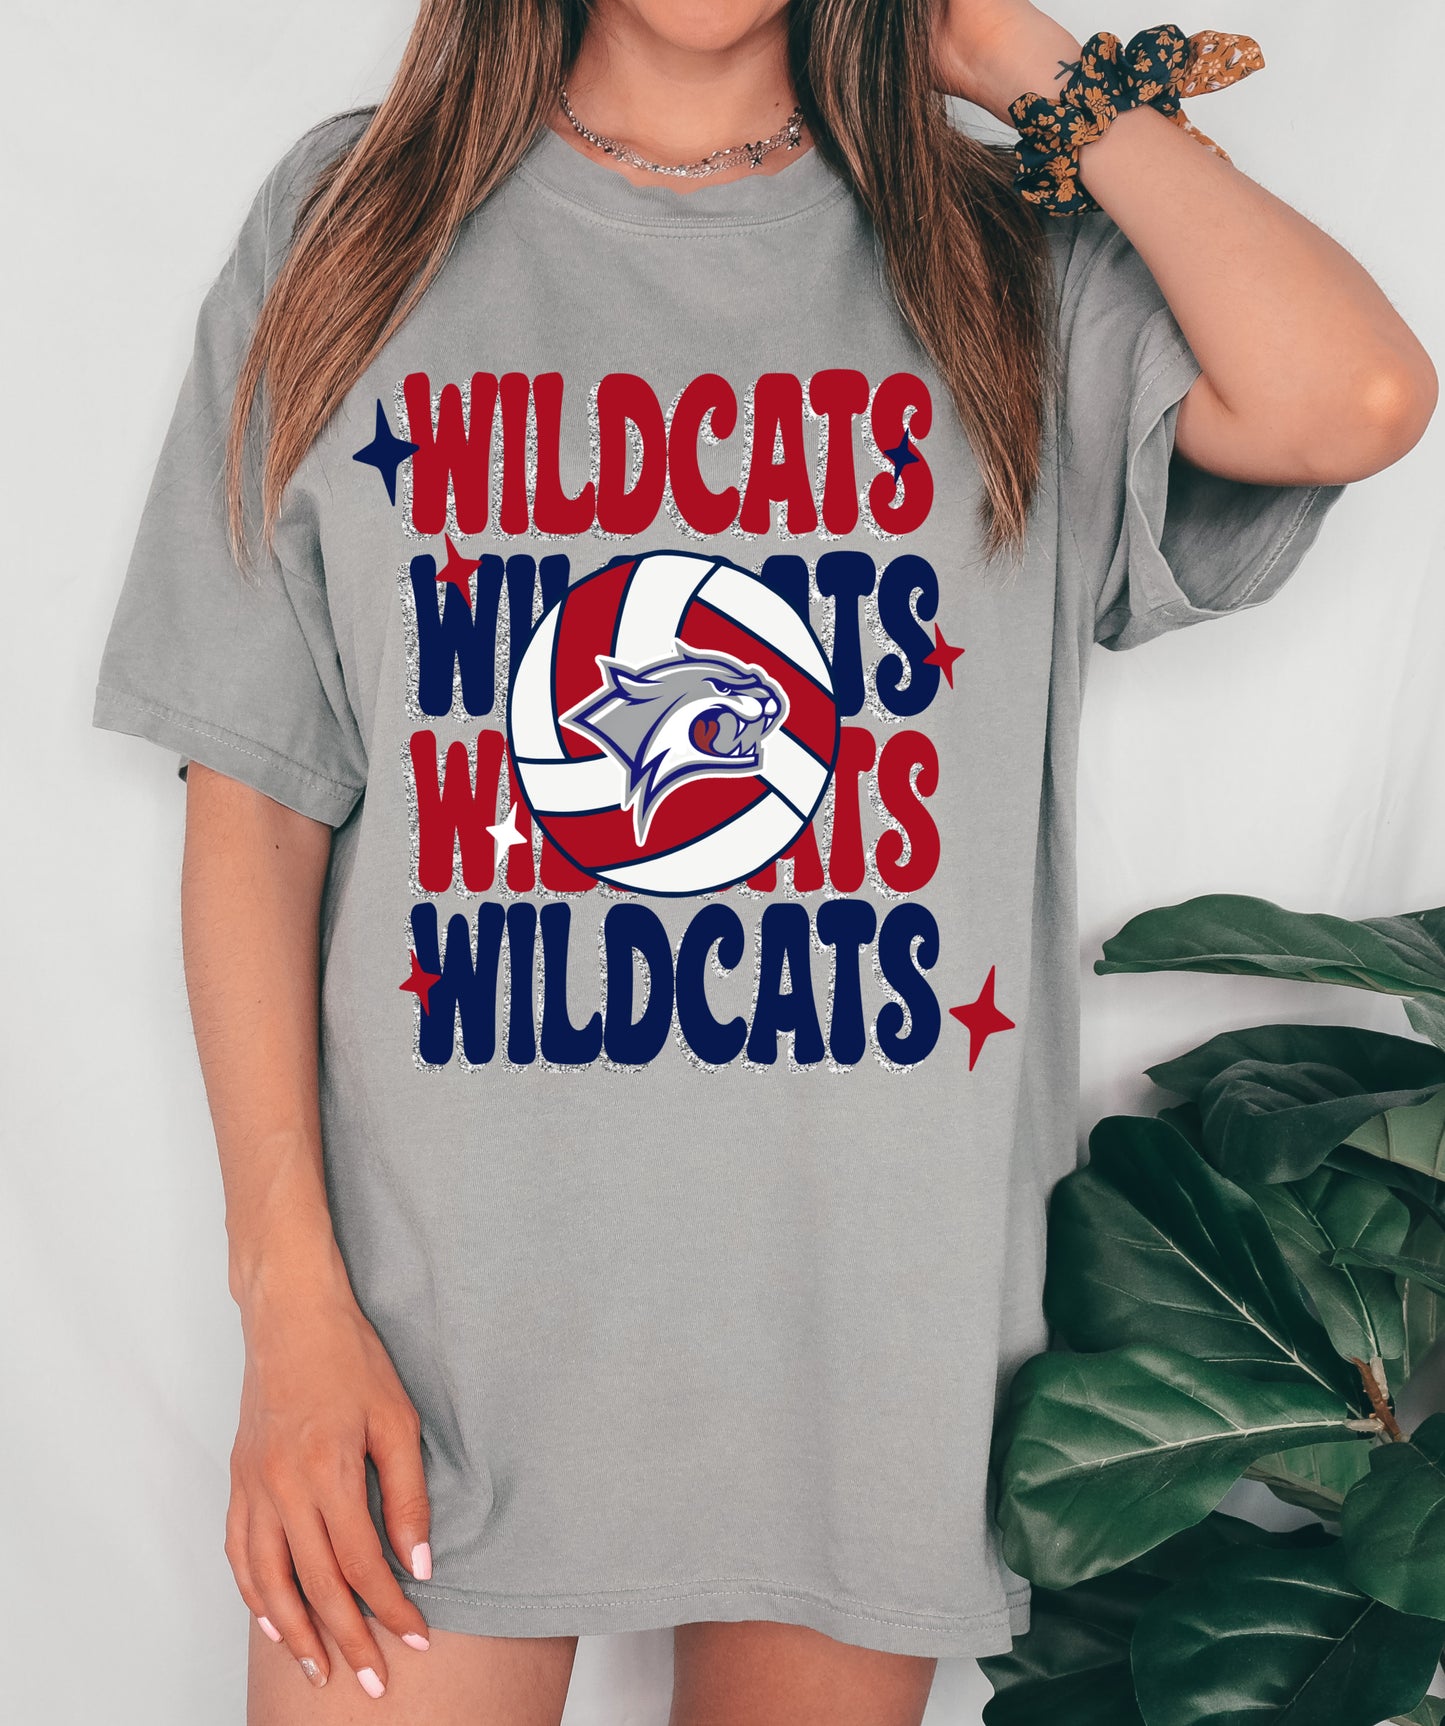 Cooter Wildcats Volleyball Comfort Colors Tee/ Youth and Adult Size Option